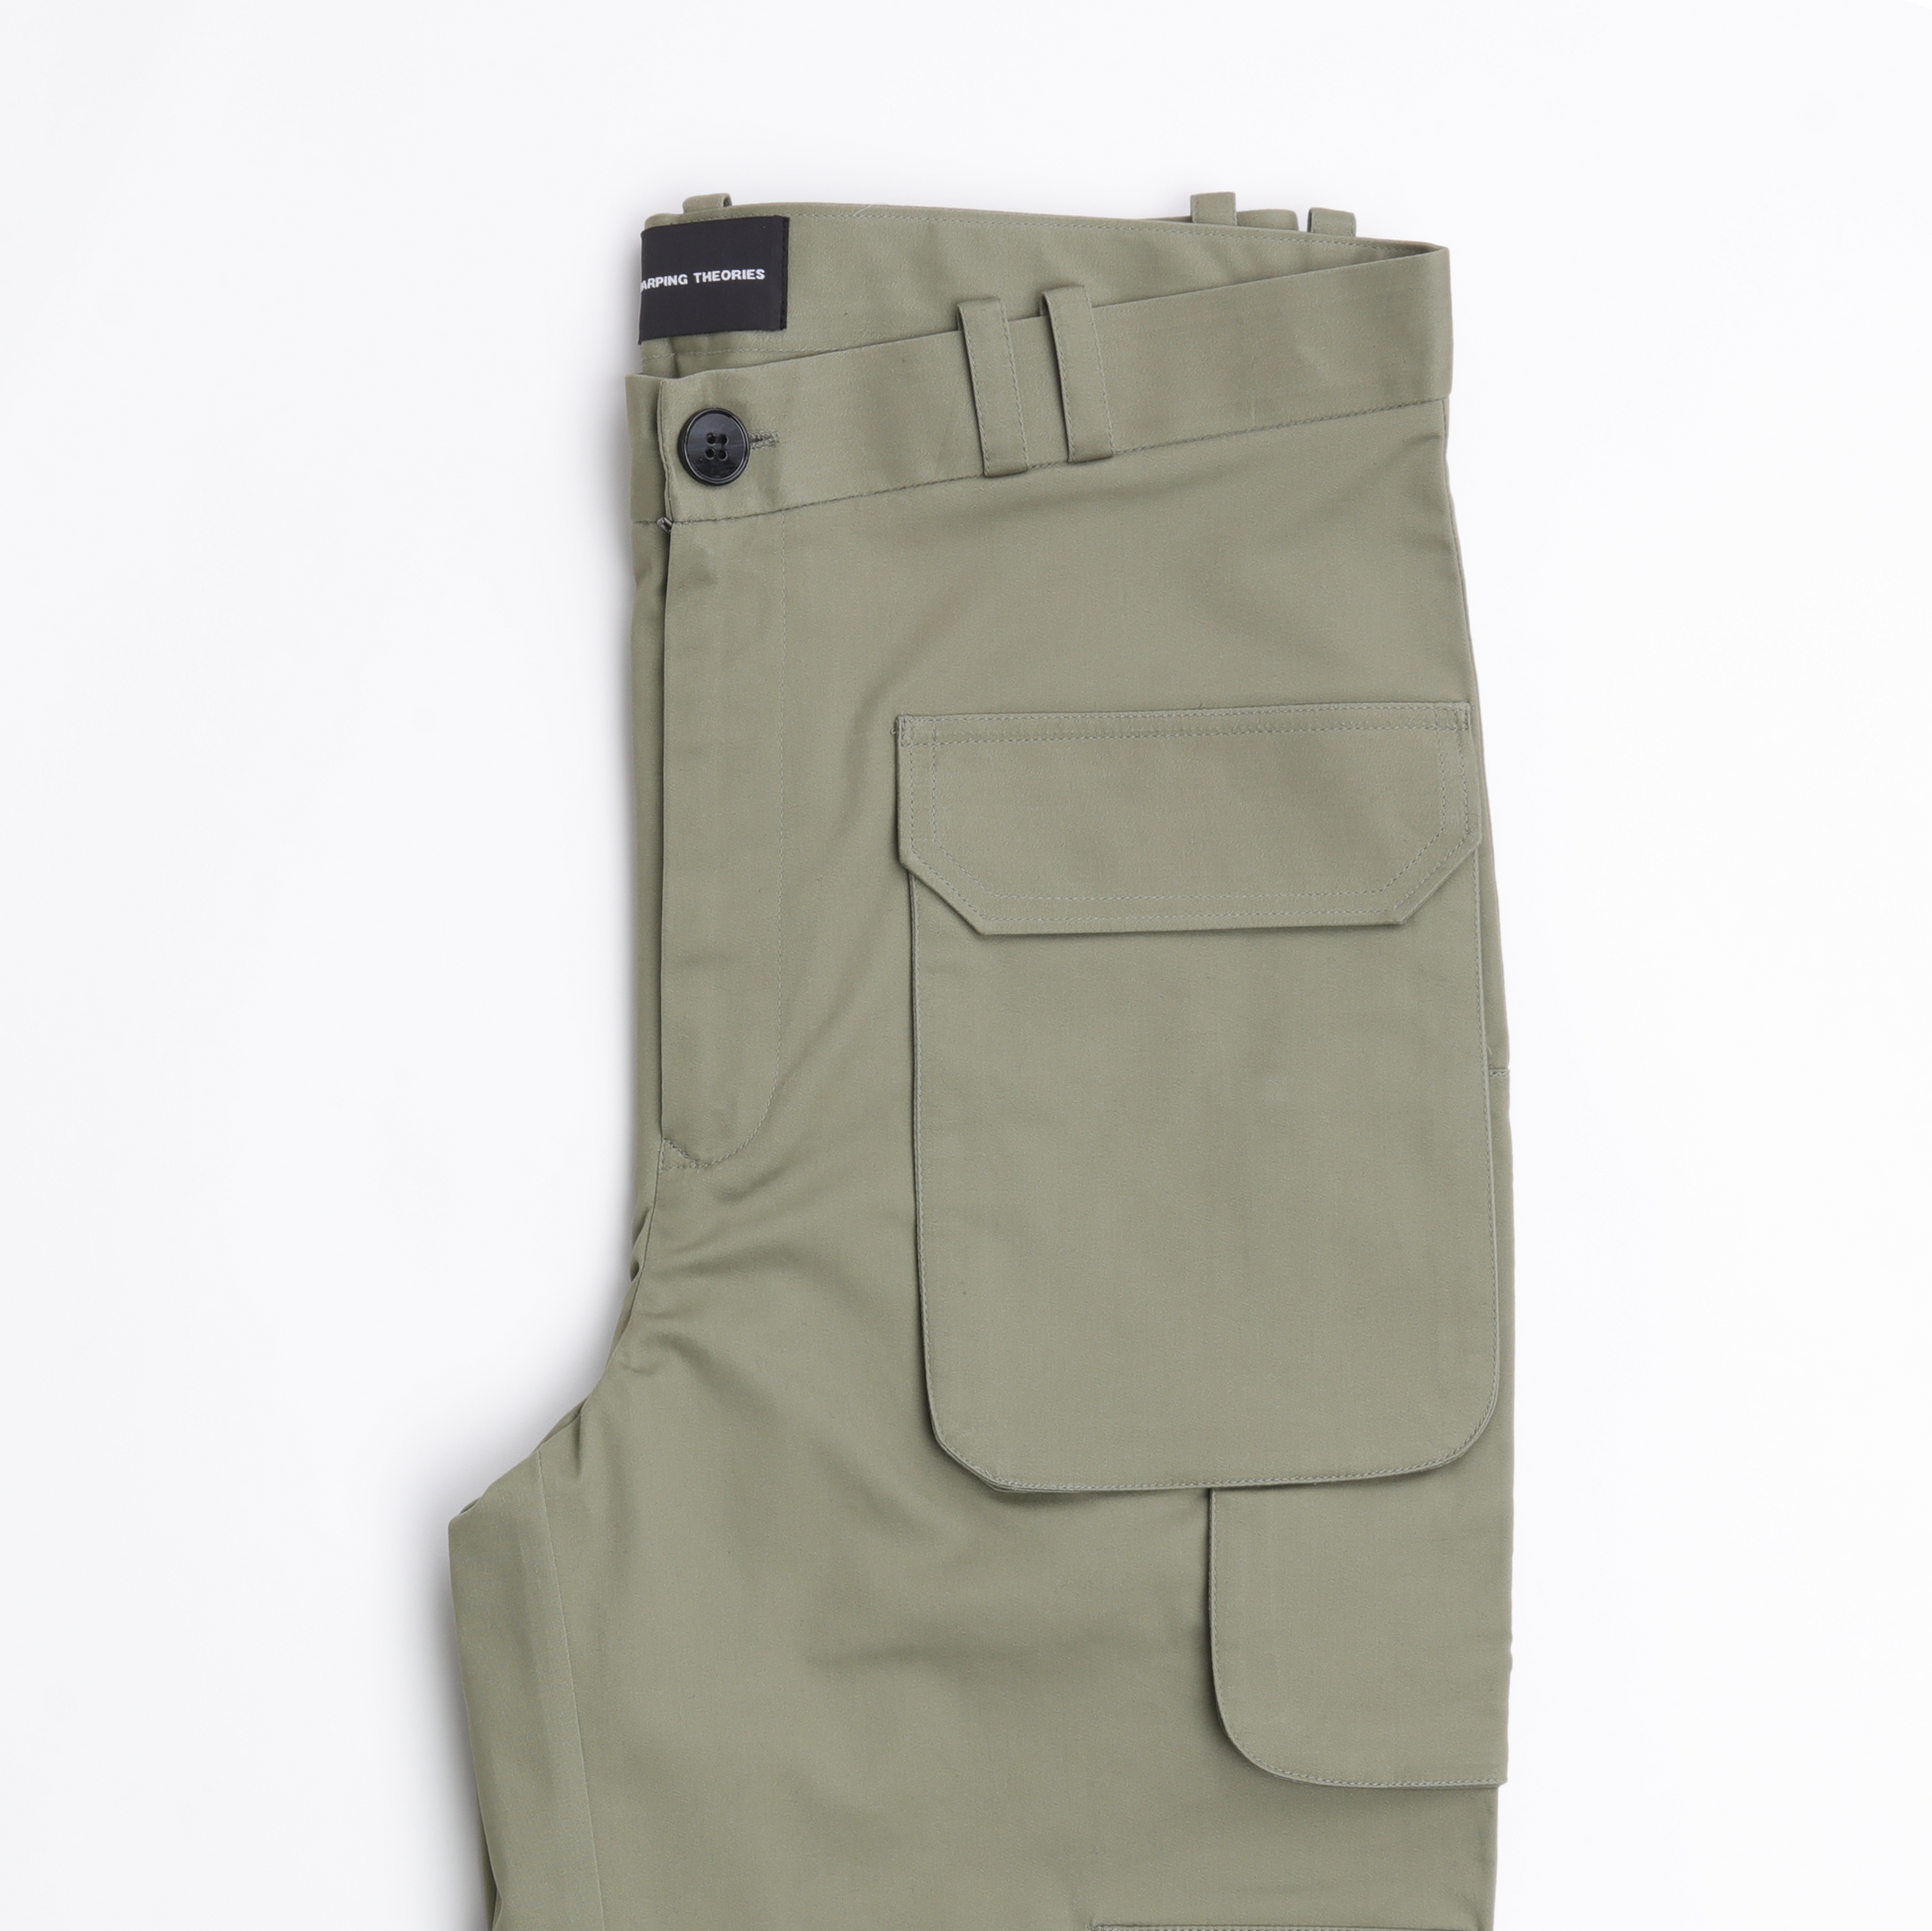 CLOSE UP, FLATLAY, GREEN CARGO PANTS, ARMY GREEN COLOURWAY, DICKIS CARGO PANTS, CARGO PANTS MENS, CARGO PANTS WOMENS, UNISEX, UNISEX CARGO PANTS, CIGARETTE PANTS, TAILORED FIT, people also ask